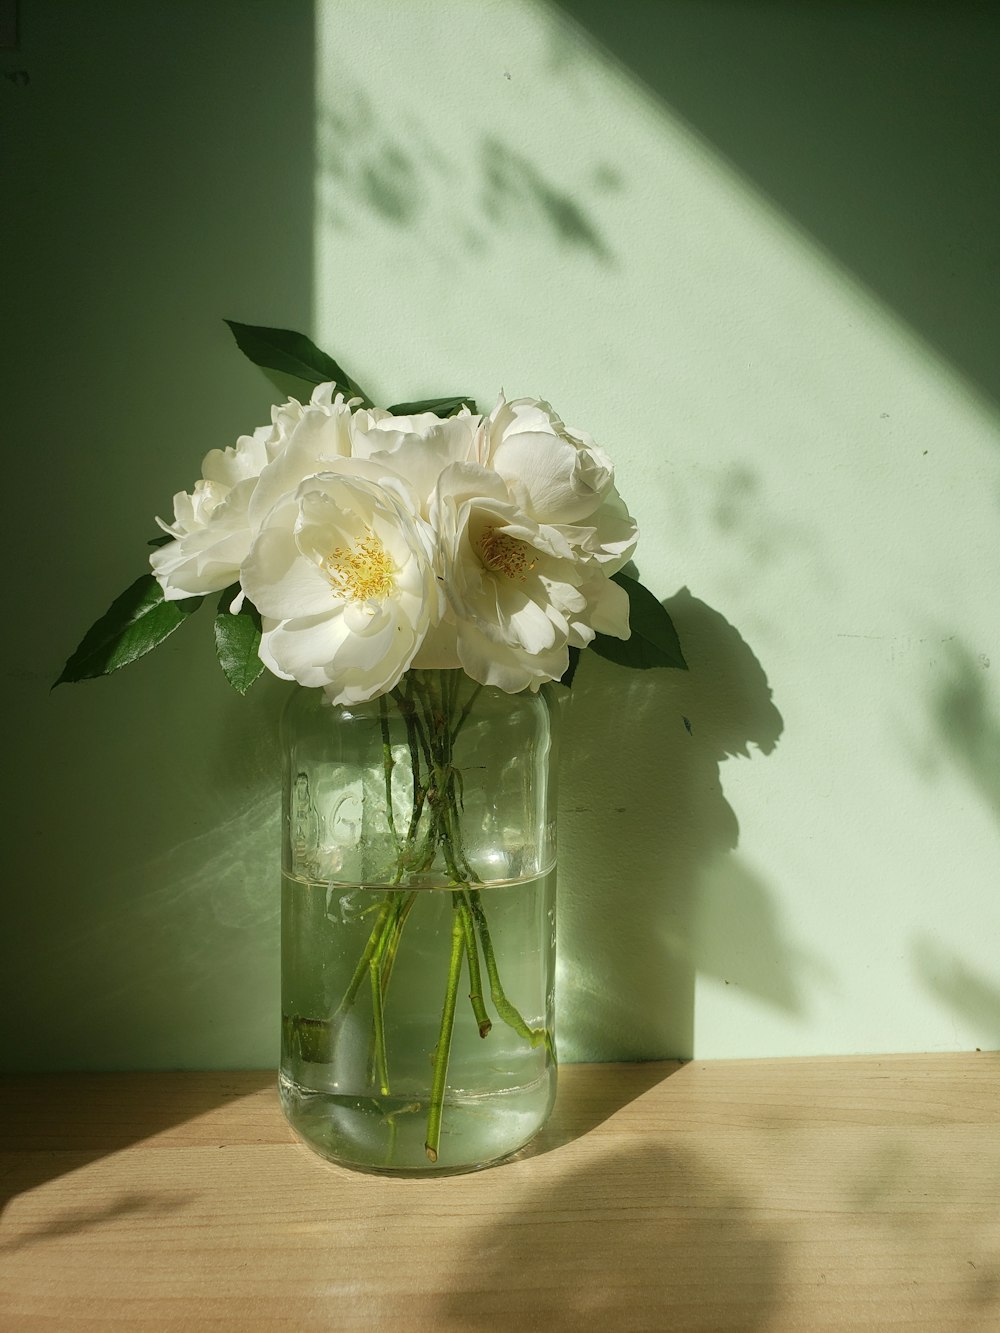 White flowers in clear glass vase photo – Free Flower Image on Unsplash